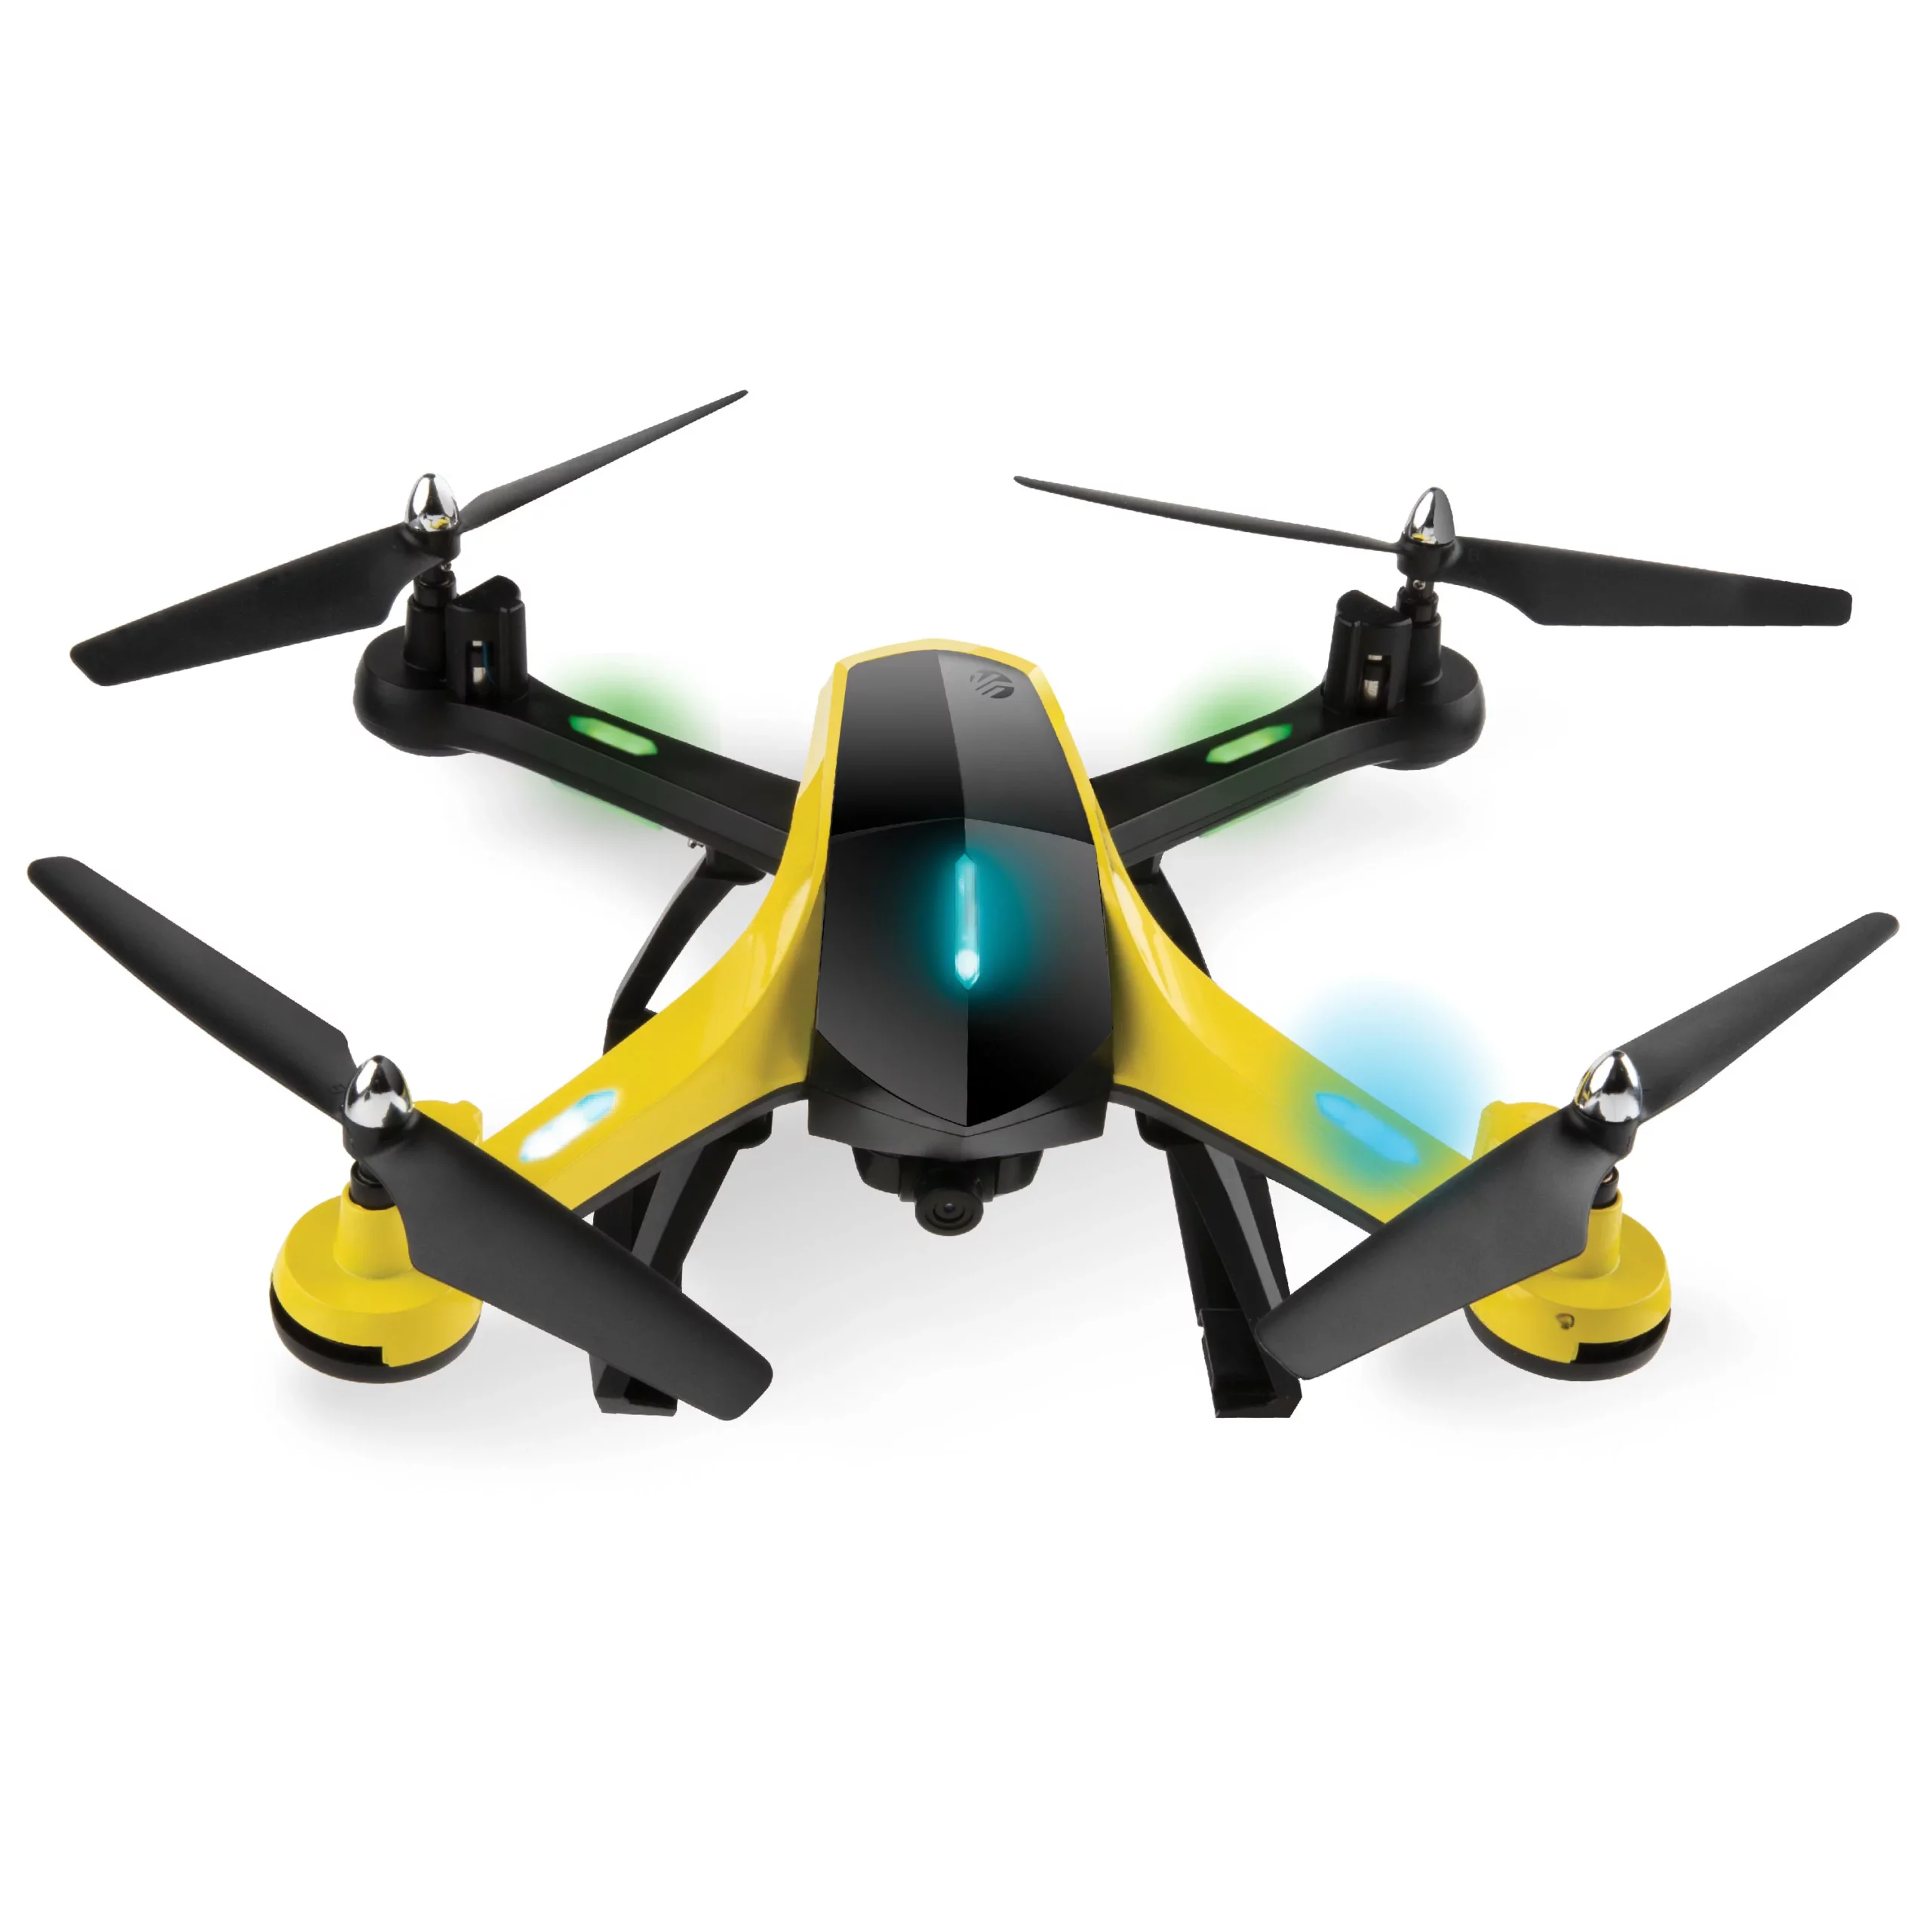 Read more about the article SkyTracker GPS Video Drone: Your Videography Game-Change